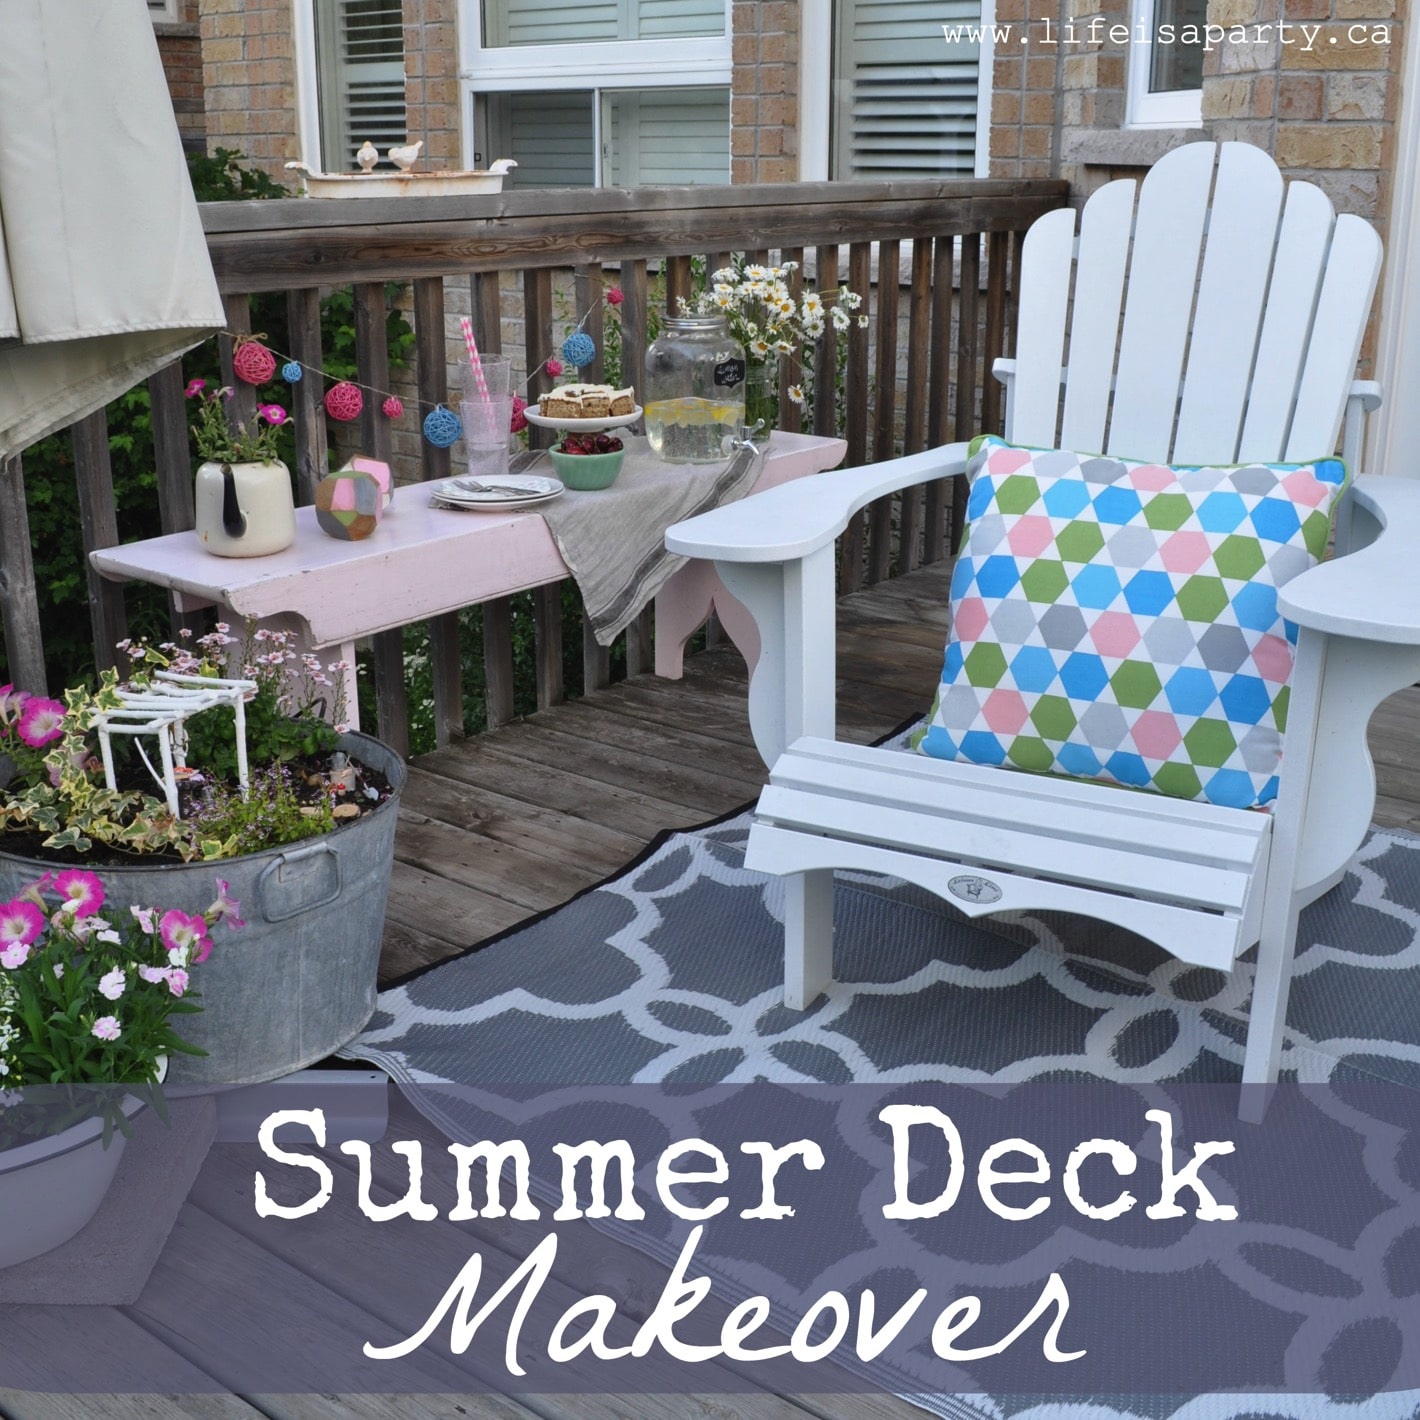 Summer Deck Makeover: simple and pretty summer deck makeover ideas.